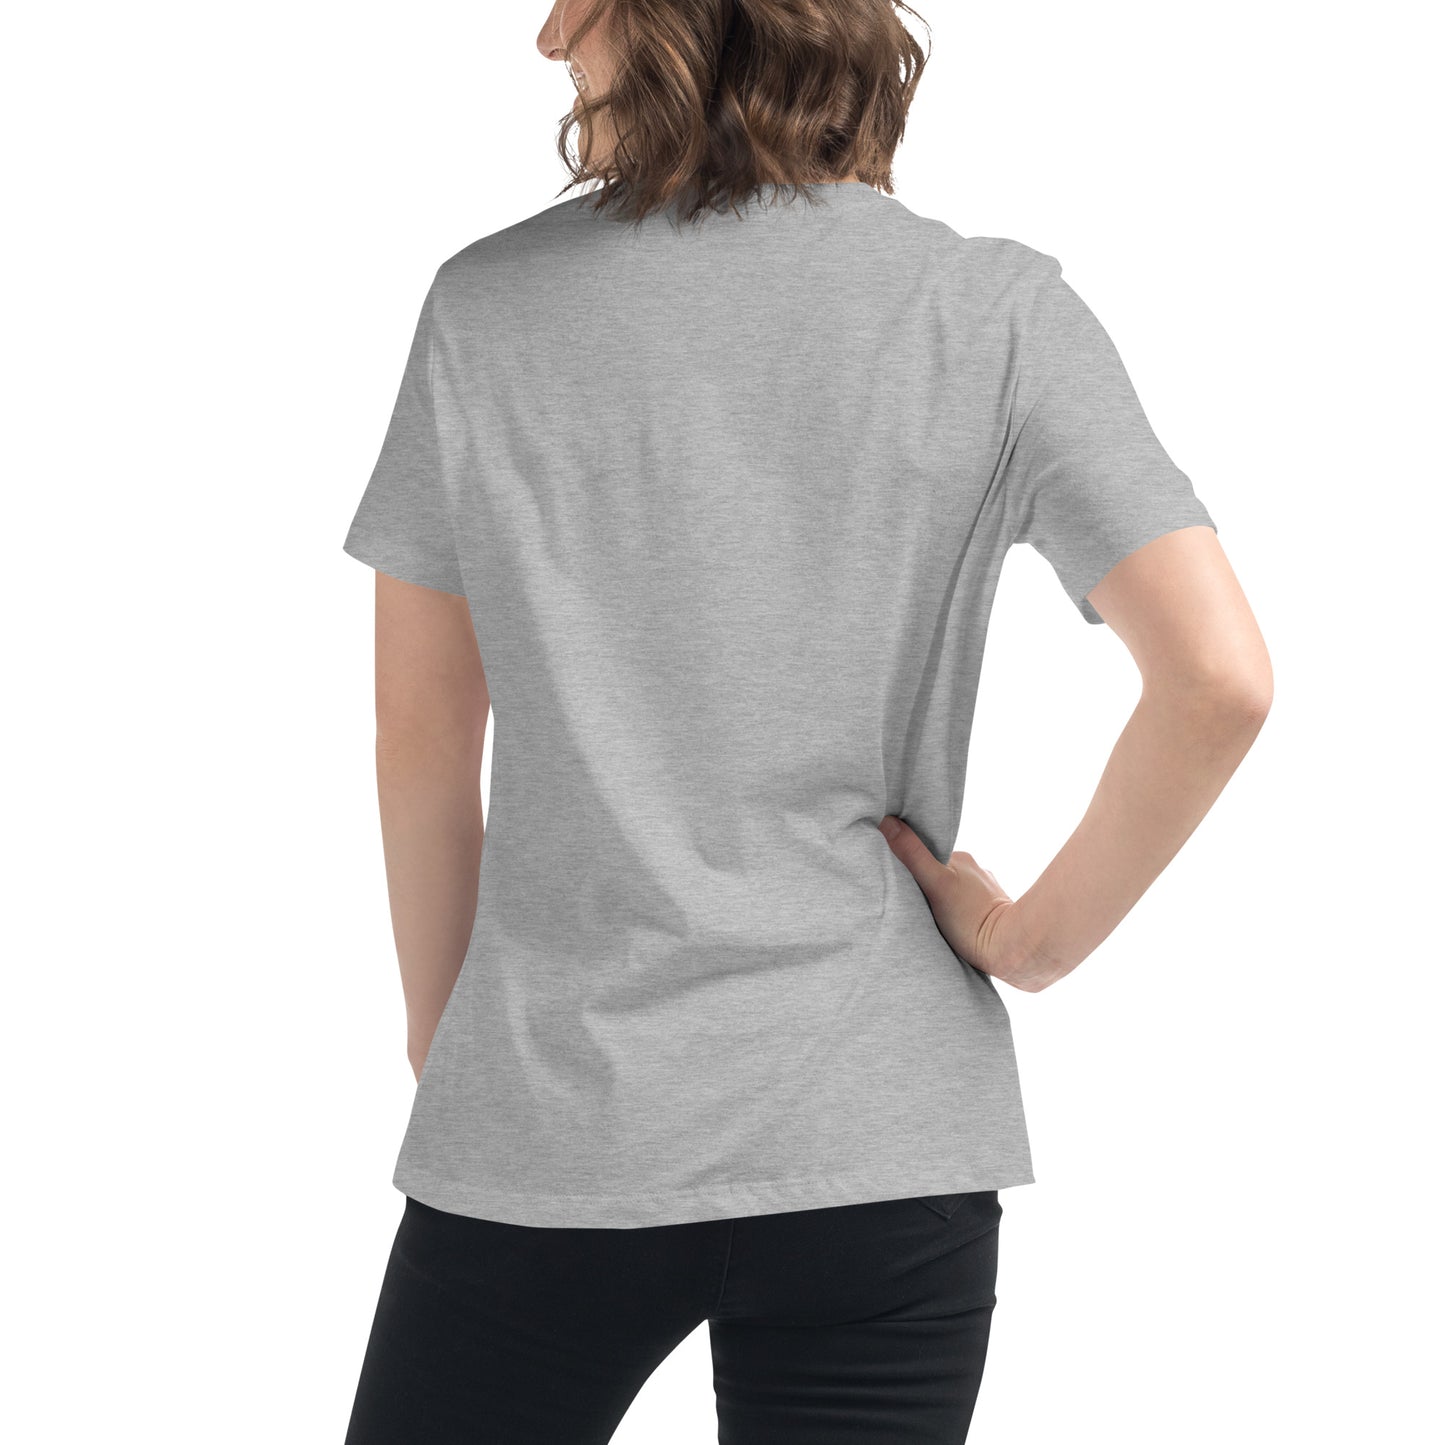 Nurture Your Nature (dolphins) - Women's Relaxed T-Shirt